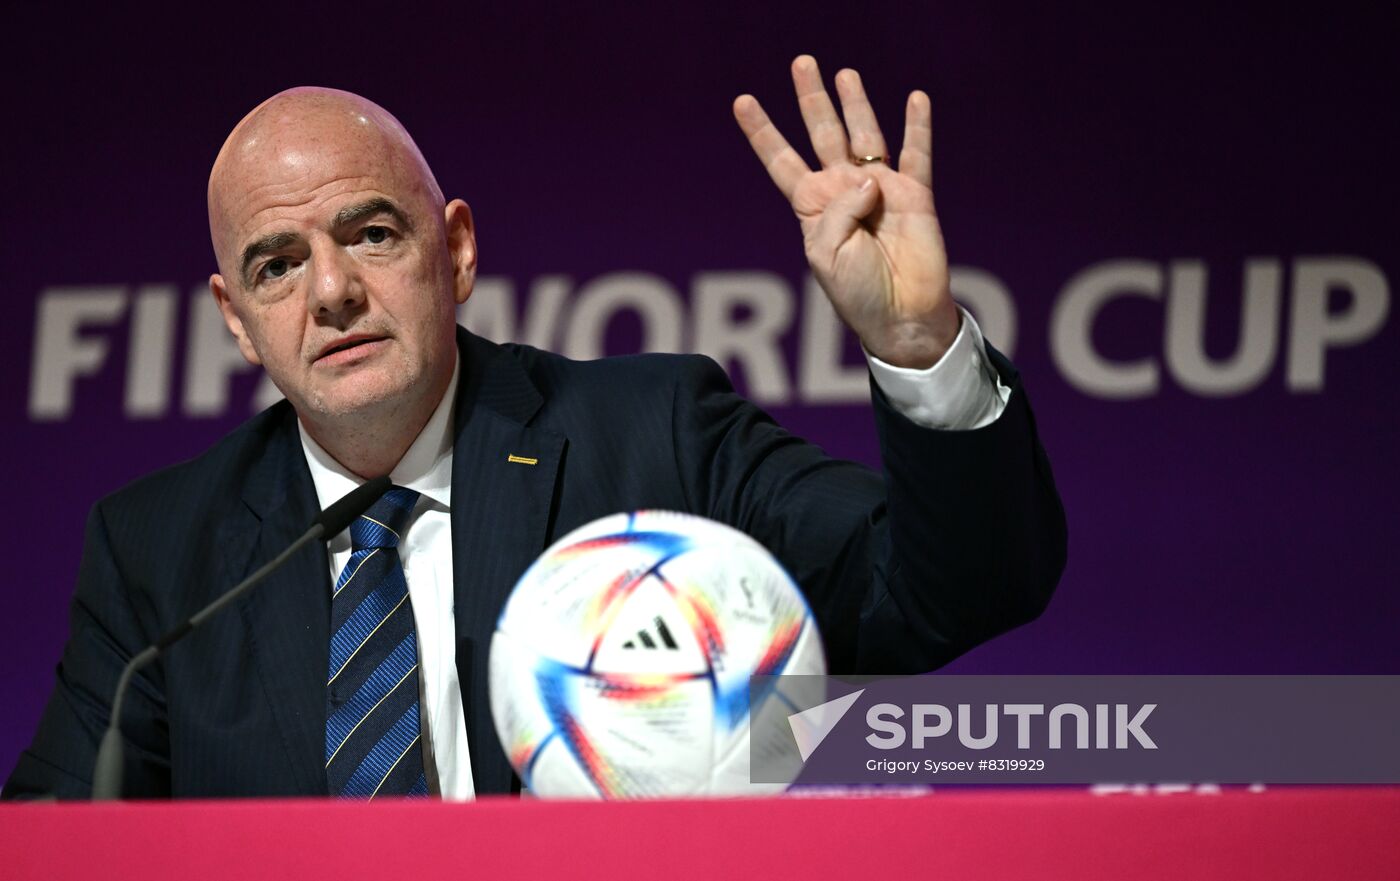 Qatar Soccer World Cup FIFA President Press Conference